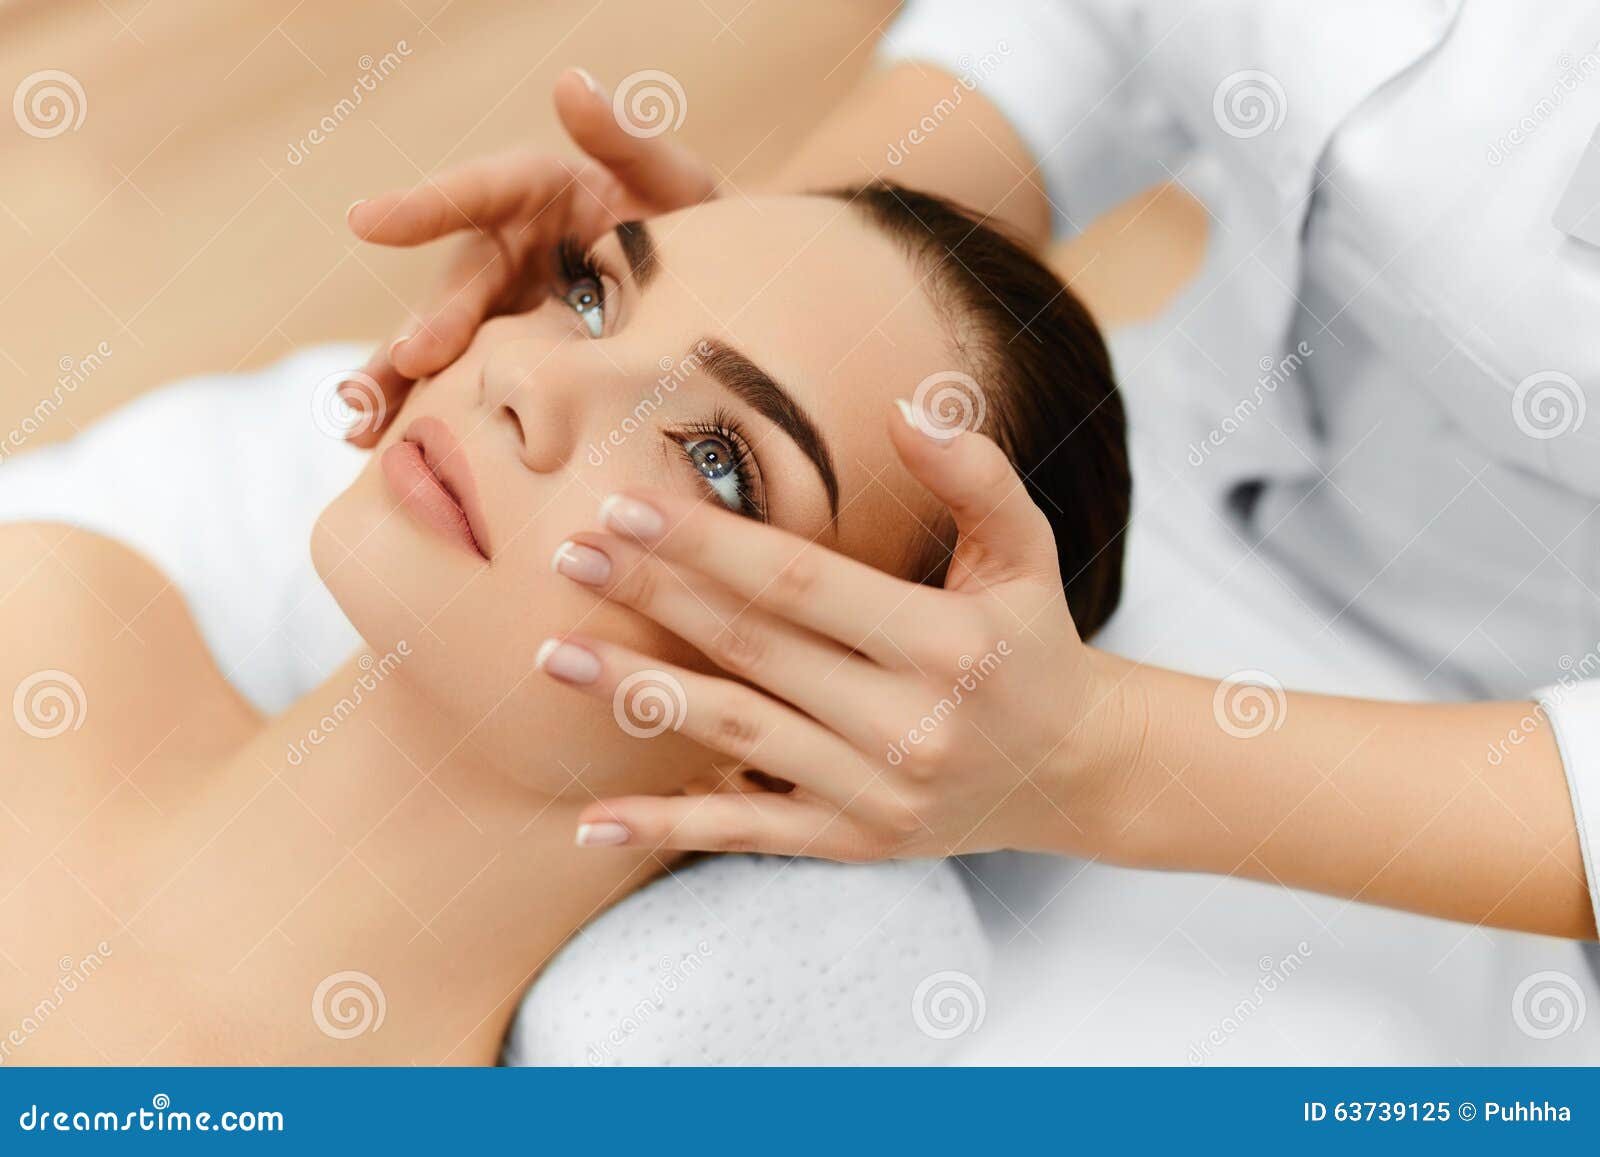 skin, body care. woman getting beauty spa face massage. treatment.